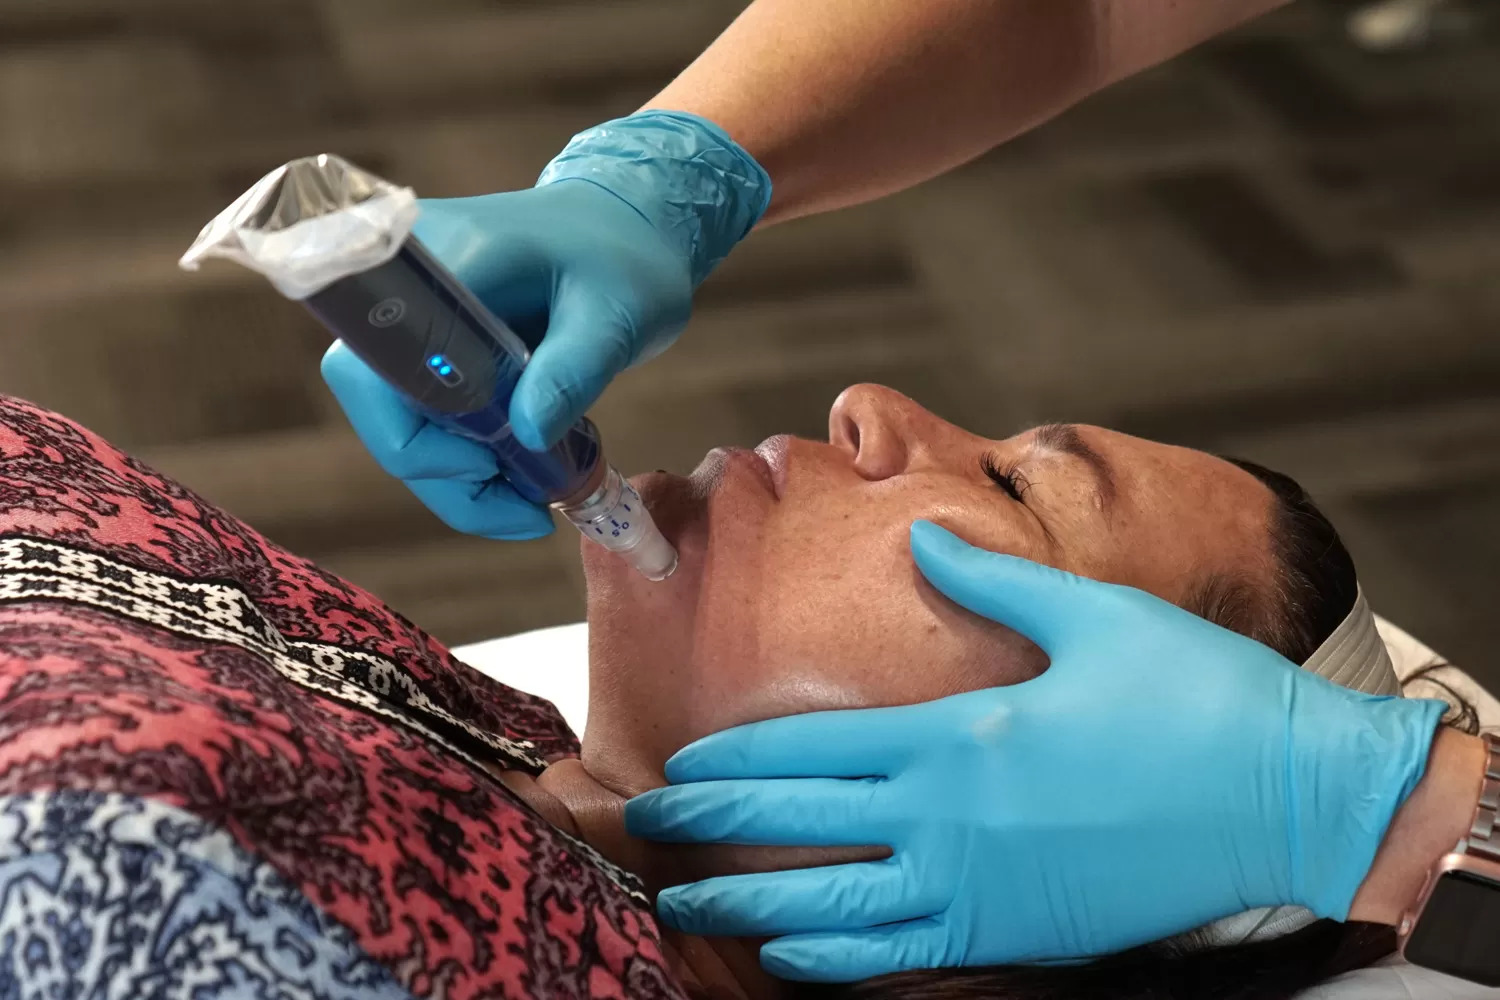 Facial Rejuvenation With SkinPen Microneedling